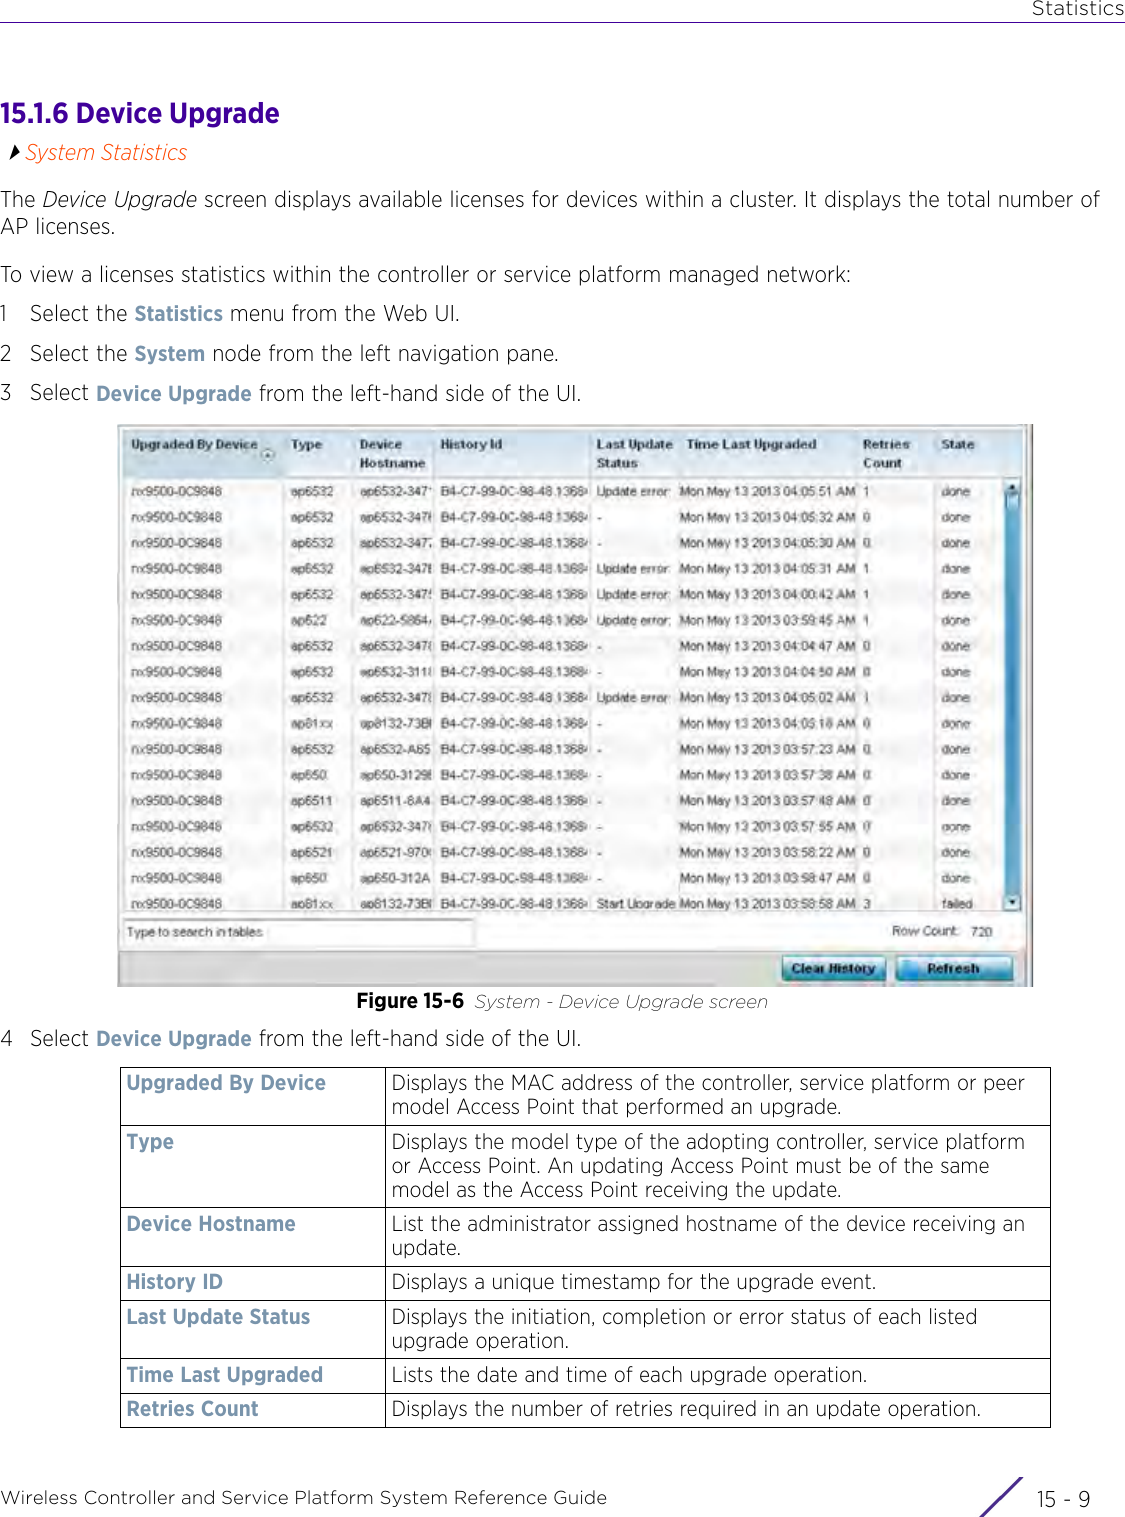 StatisticsWireless Controller and Service Platform System Reference Guide 15 - 915.1.6 Device UpgradeSystem StatisticsThe Device Upgrade screen displays available licenses for devices within a cluster. It displays the total number of AP licenses. To view a licenses statistics within the controller or service platform managed network:1 Select the Statistics menu from the Web UI.2 Select the System node from the left navigation pane.3Select Device Upgrade from the left-hand side of the UI.Figure 15-6 System - Device Upgrade screen4Select Device Upgrade from the left-hand side of the UI.Upgraded By Device Displays the MAC address of the controller, service platform or peer model Access Point that performed an upgrade.Type Displays the model type of the adopting controller, service platform or Access Point. An updating Access Point must be of the same model as the Access Point receiving the update.Device Hostname List the administrator assigned hostname of the device receiving an update.History ID Displays a unique timestamp for the upgrade event.Last Update Status Displays the initiation, completion or error status of each listed upgrade operation.Time Last Upgraded Lists the date and time of each upgrade operation.Retries Count Displays the number of retries required in an update operation.